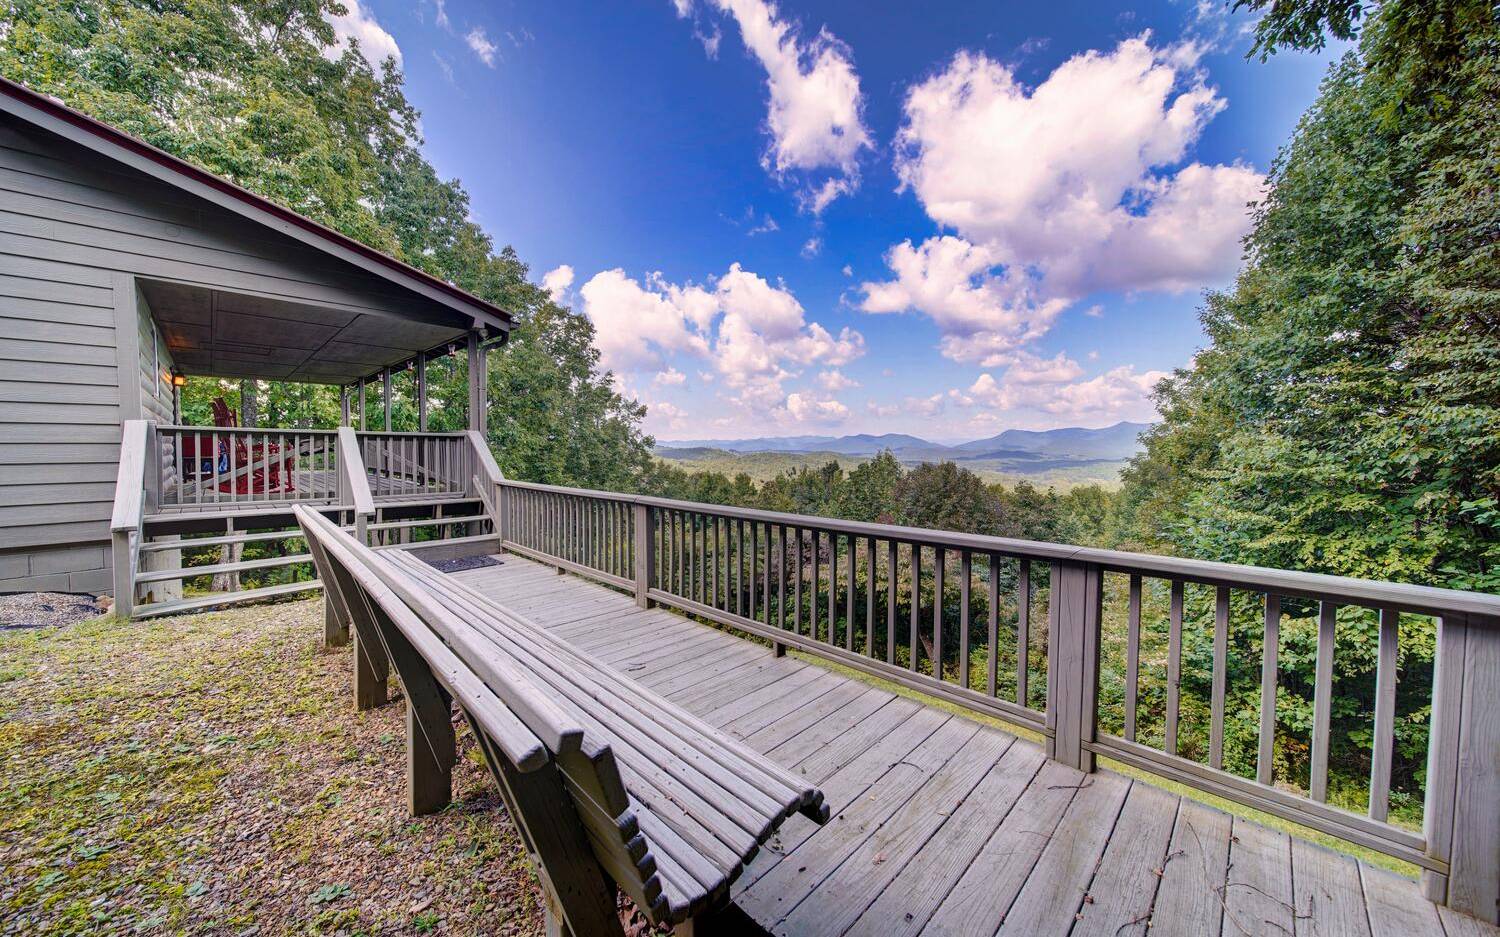 MILLION DOLLAR VIEWS***This COZY cabin is the perfect little piece of heaven in the mountains. Has a Northern view of Georgia, Tennessee & NC mountain ranges. Perfect for a second vacation home or turn into an AirBnB. One bedroom one bath with loft area for extra guests. Convenient to Helton Falls (approx. 5 miles), Vogel State Park (1.8 miles) Helen and the Appalachian trl.